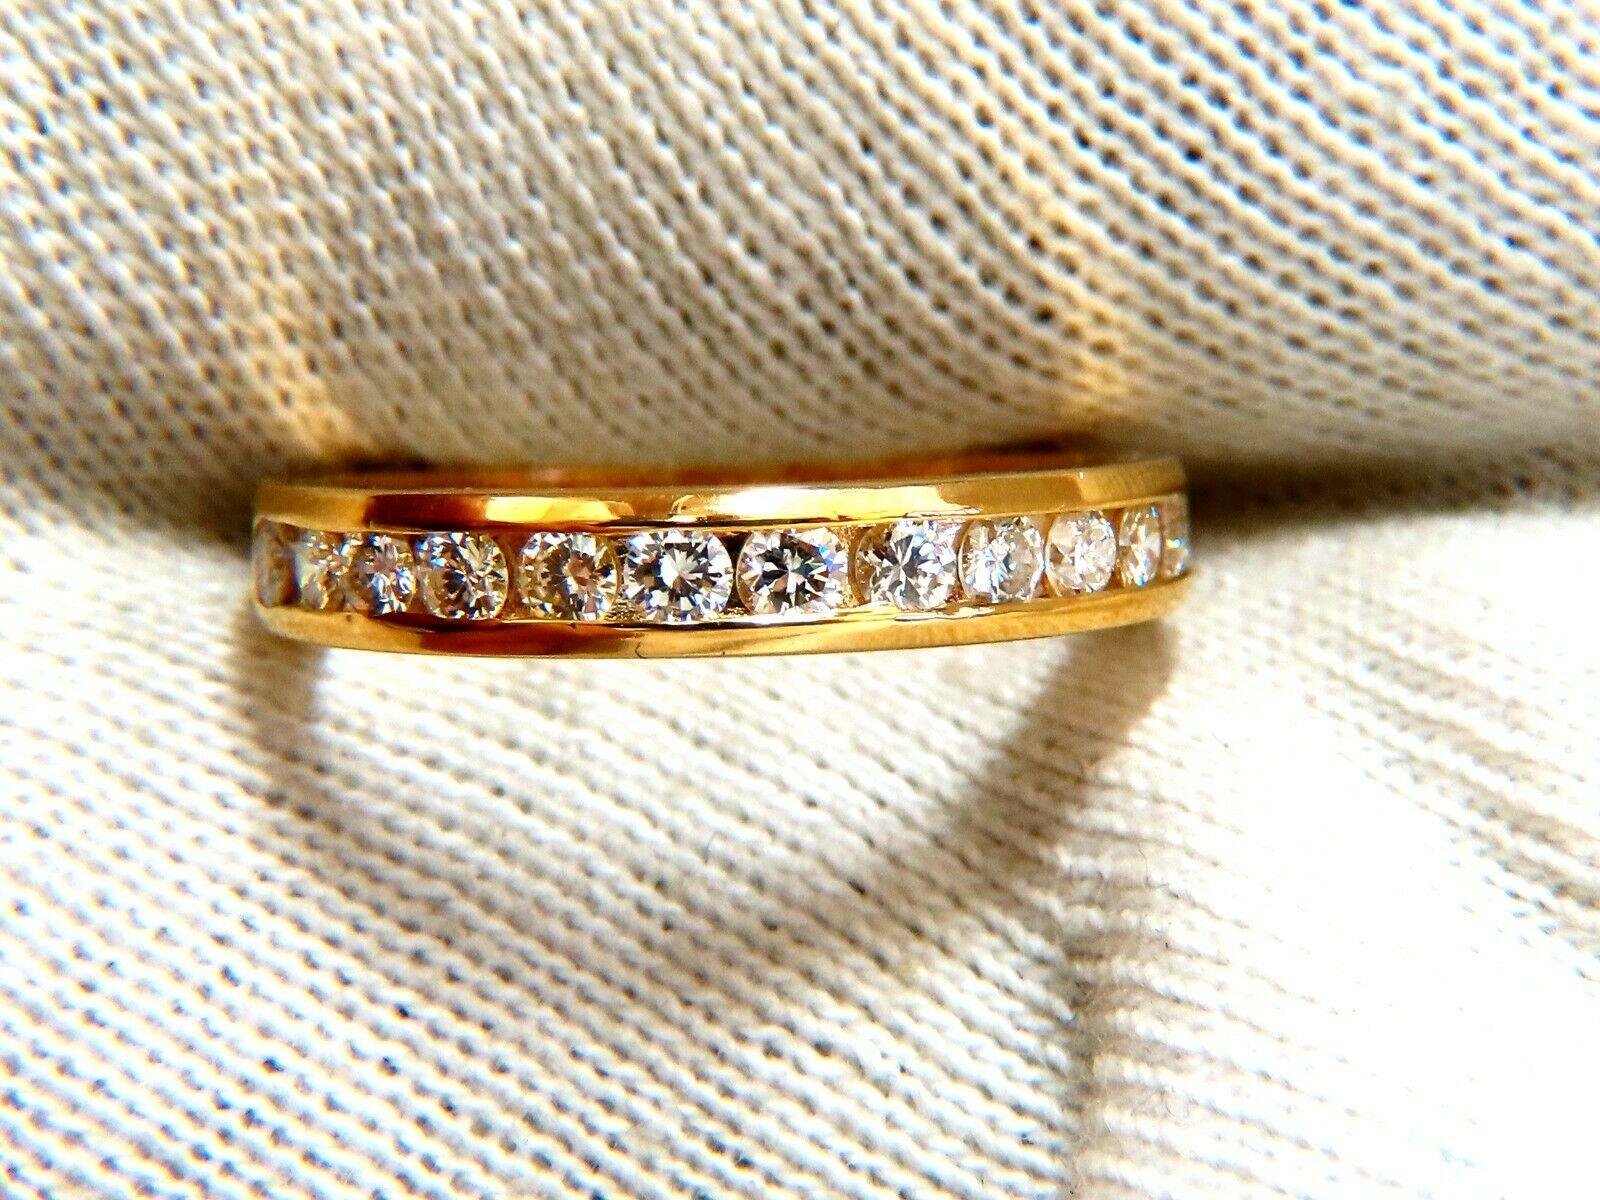 13 Band / Everyday Channel.

.52ct. Natural (13) round cut brilliant diamond

Channel Set ring.

Durable Built.

Vs-2 clarity  H color.

14kt yellow gold.

3.1 Grams

Overall ring: 3.4mm diameter

Depth: 2.1mm

Current ring size: 6

May